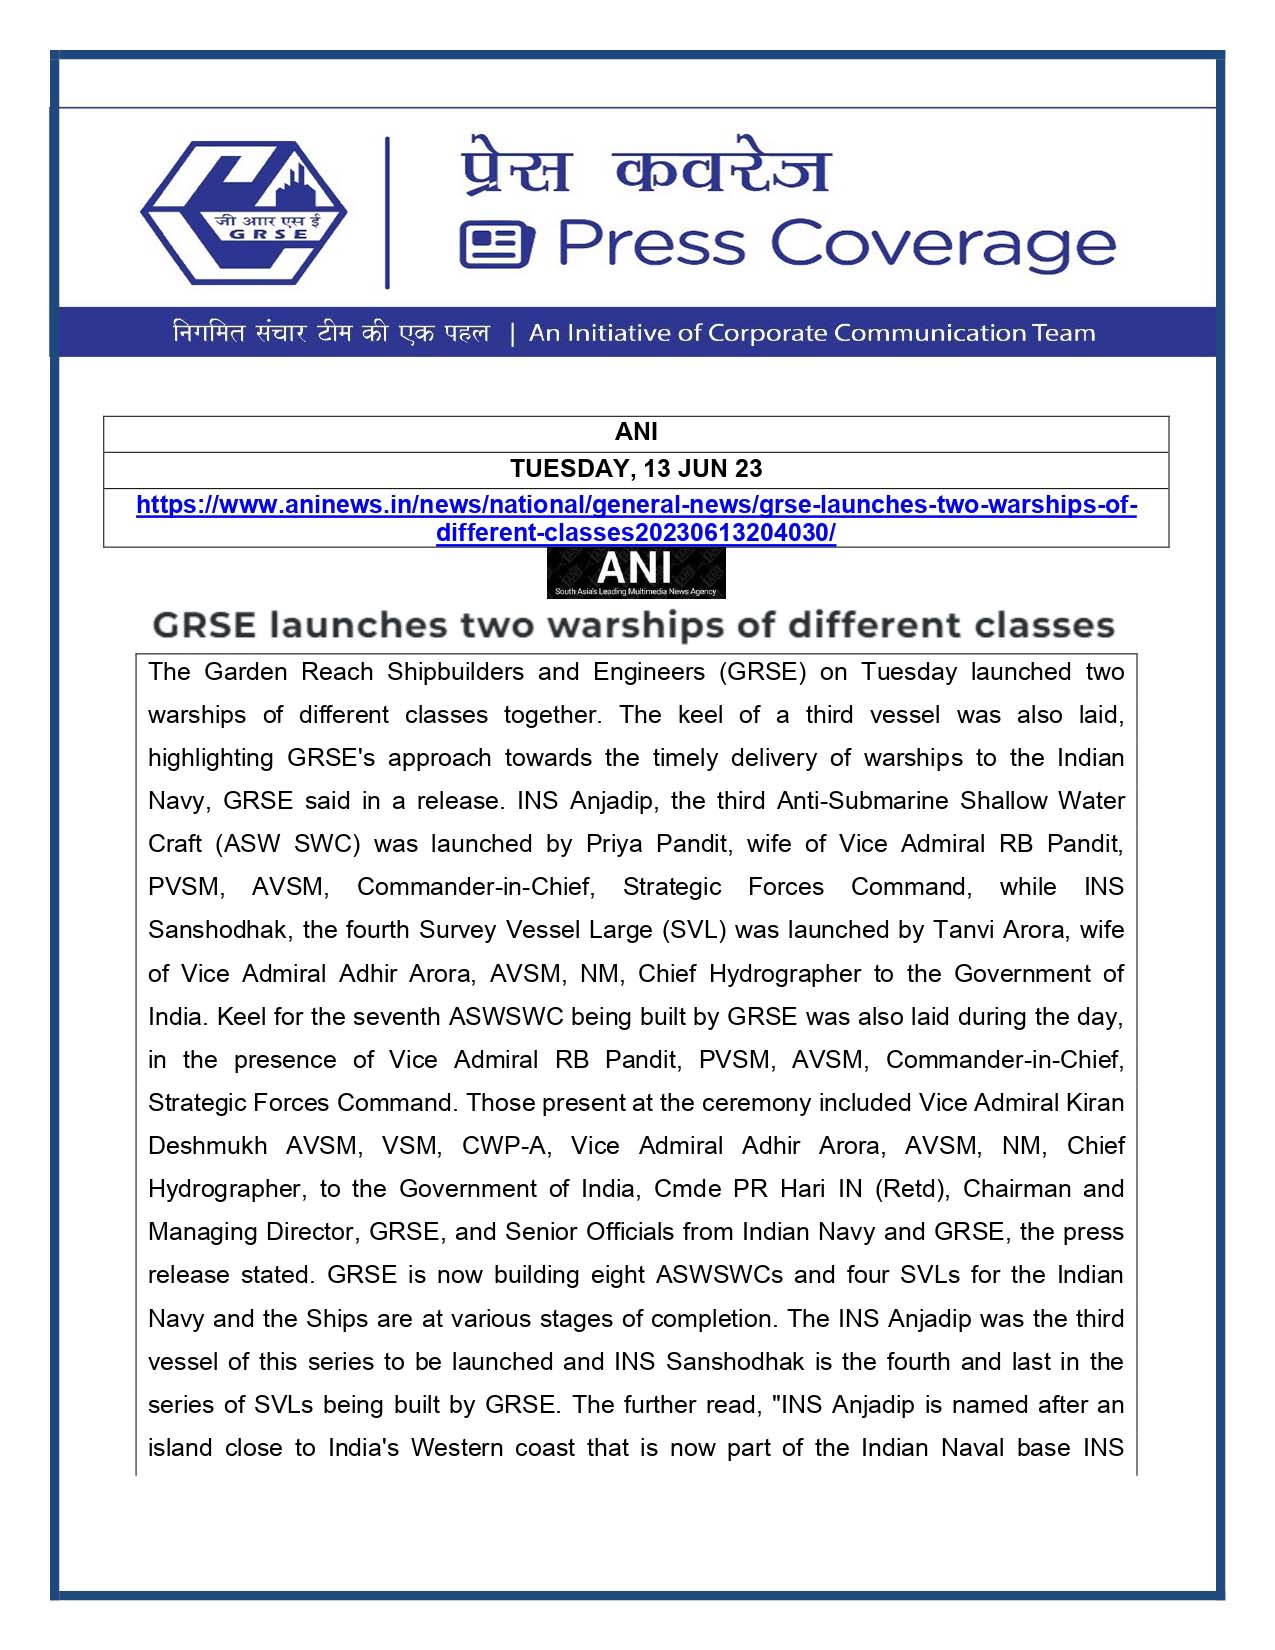 GRSE launches two warships of different classes